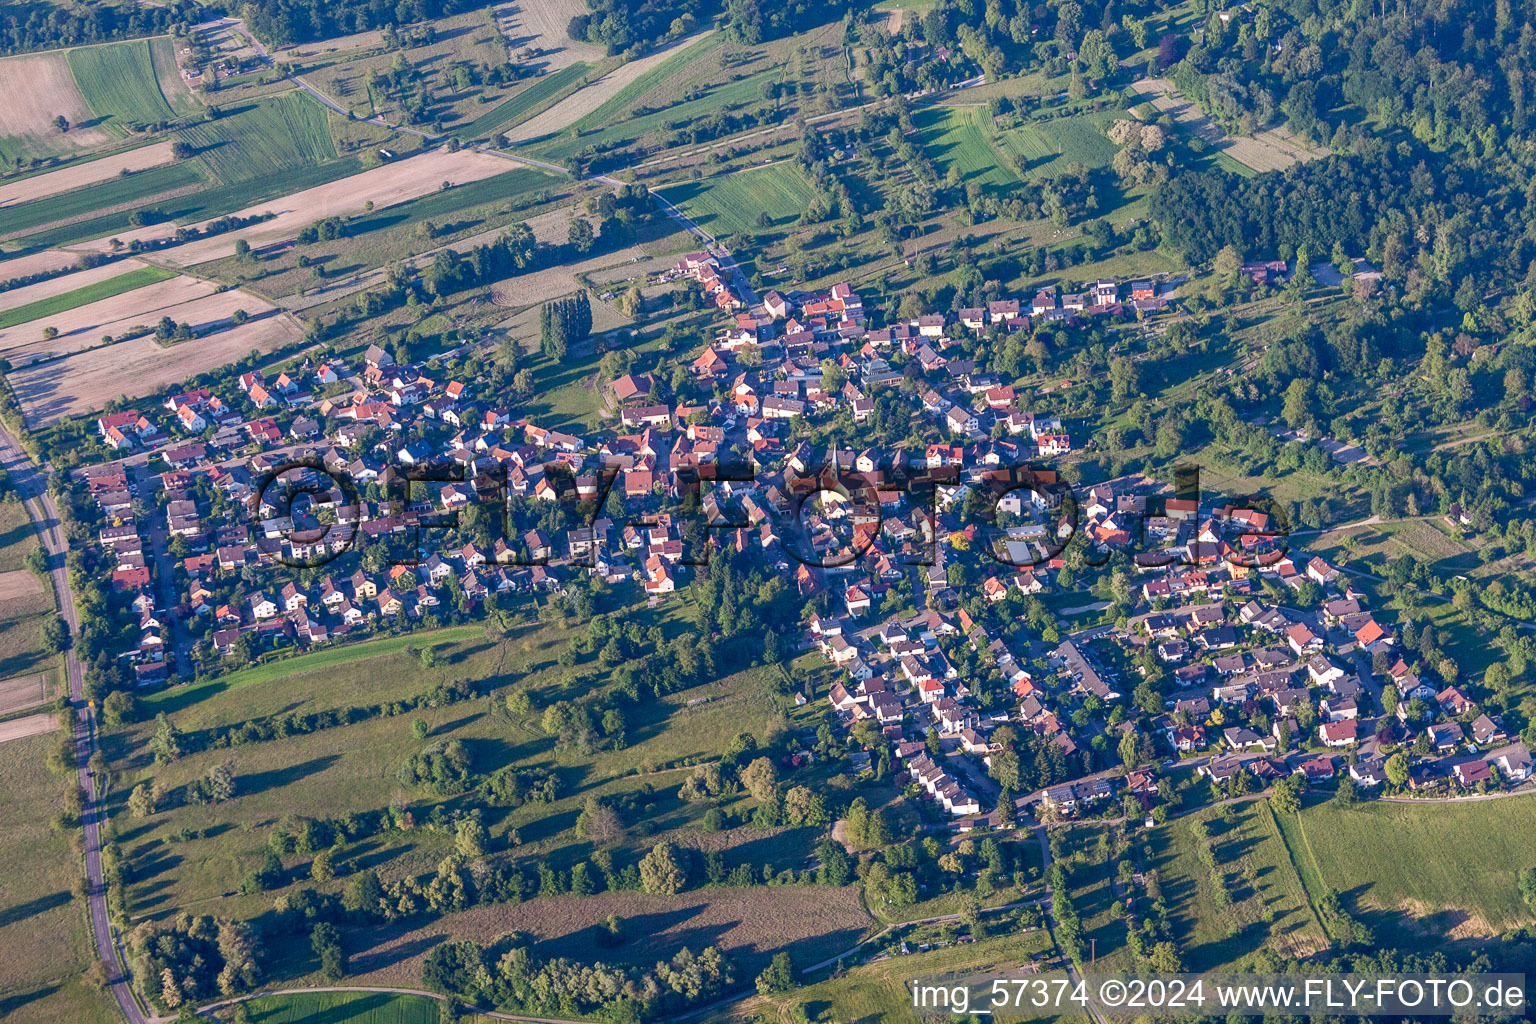 Town View of the streets and houses of the residential areas in the district Oberweier in Ettlingen in the state Baden-Wurttemberg, Germany